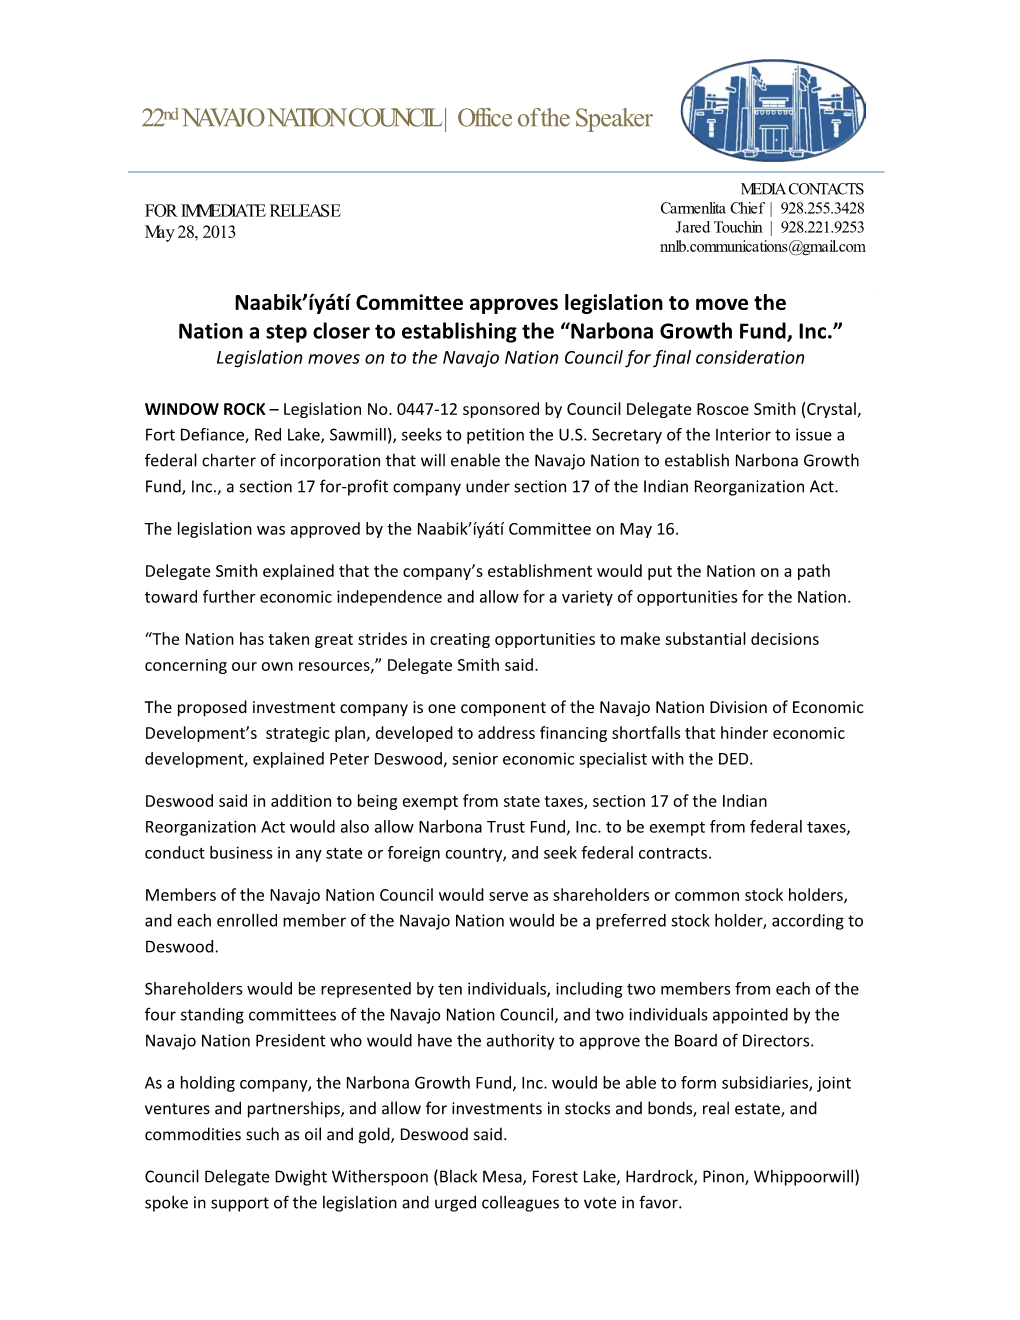 Narbona Growth Fund, Inc.” Legislation Moves on to the Navajo Nation Council for Final Consideration